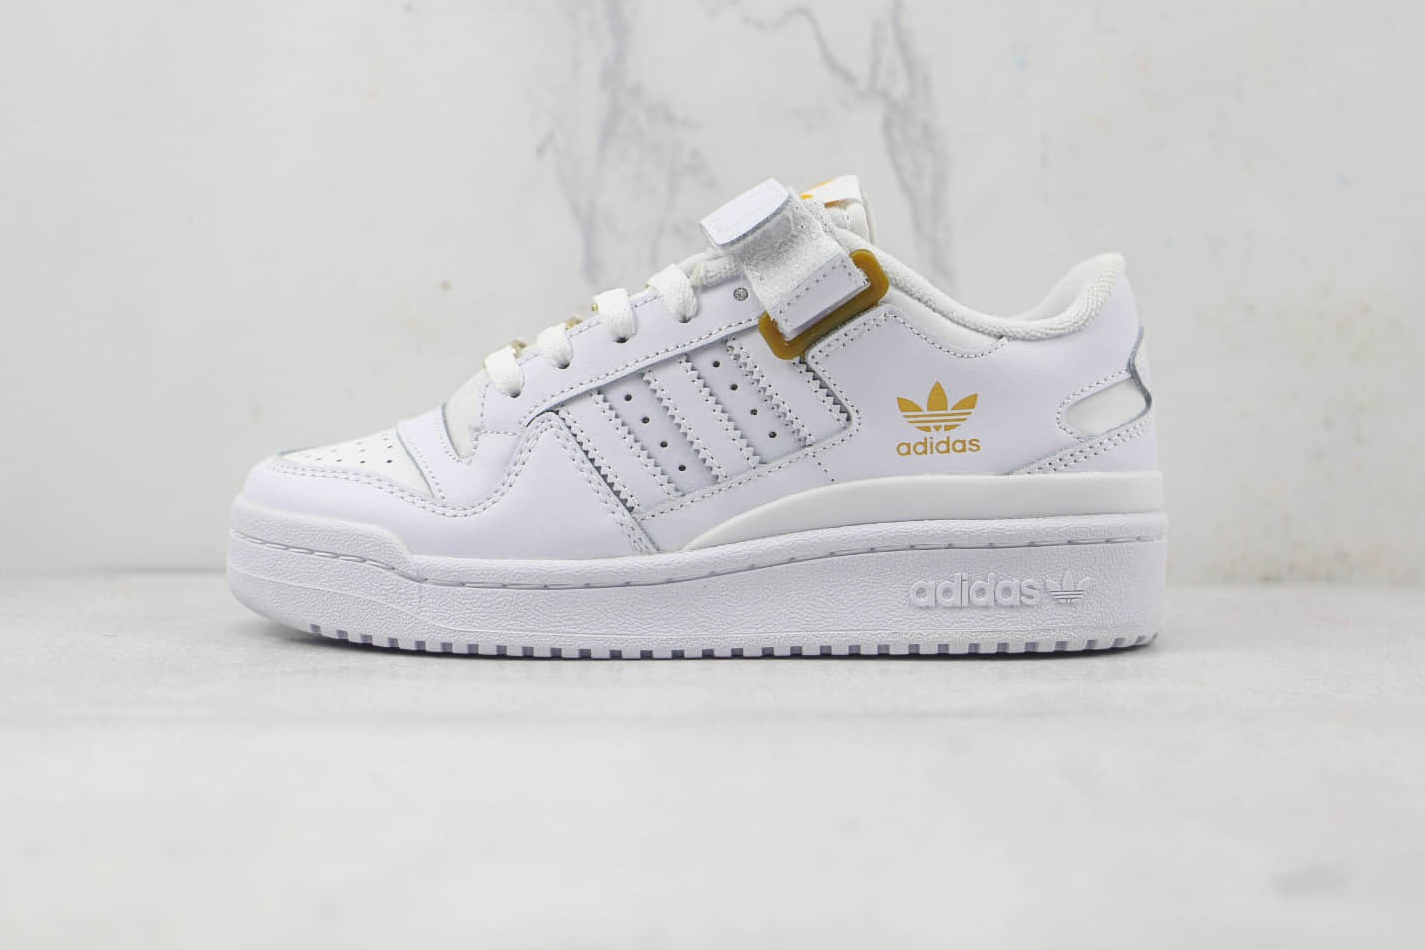 Adidas Forum Low White Gold Metallic GZ6379 - Classic Style with a Modern Twist